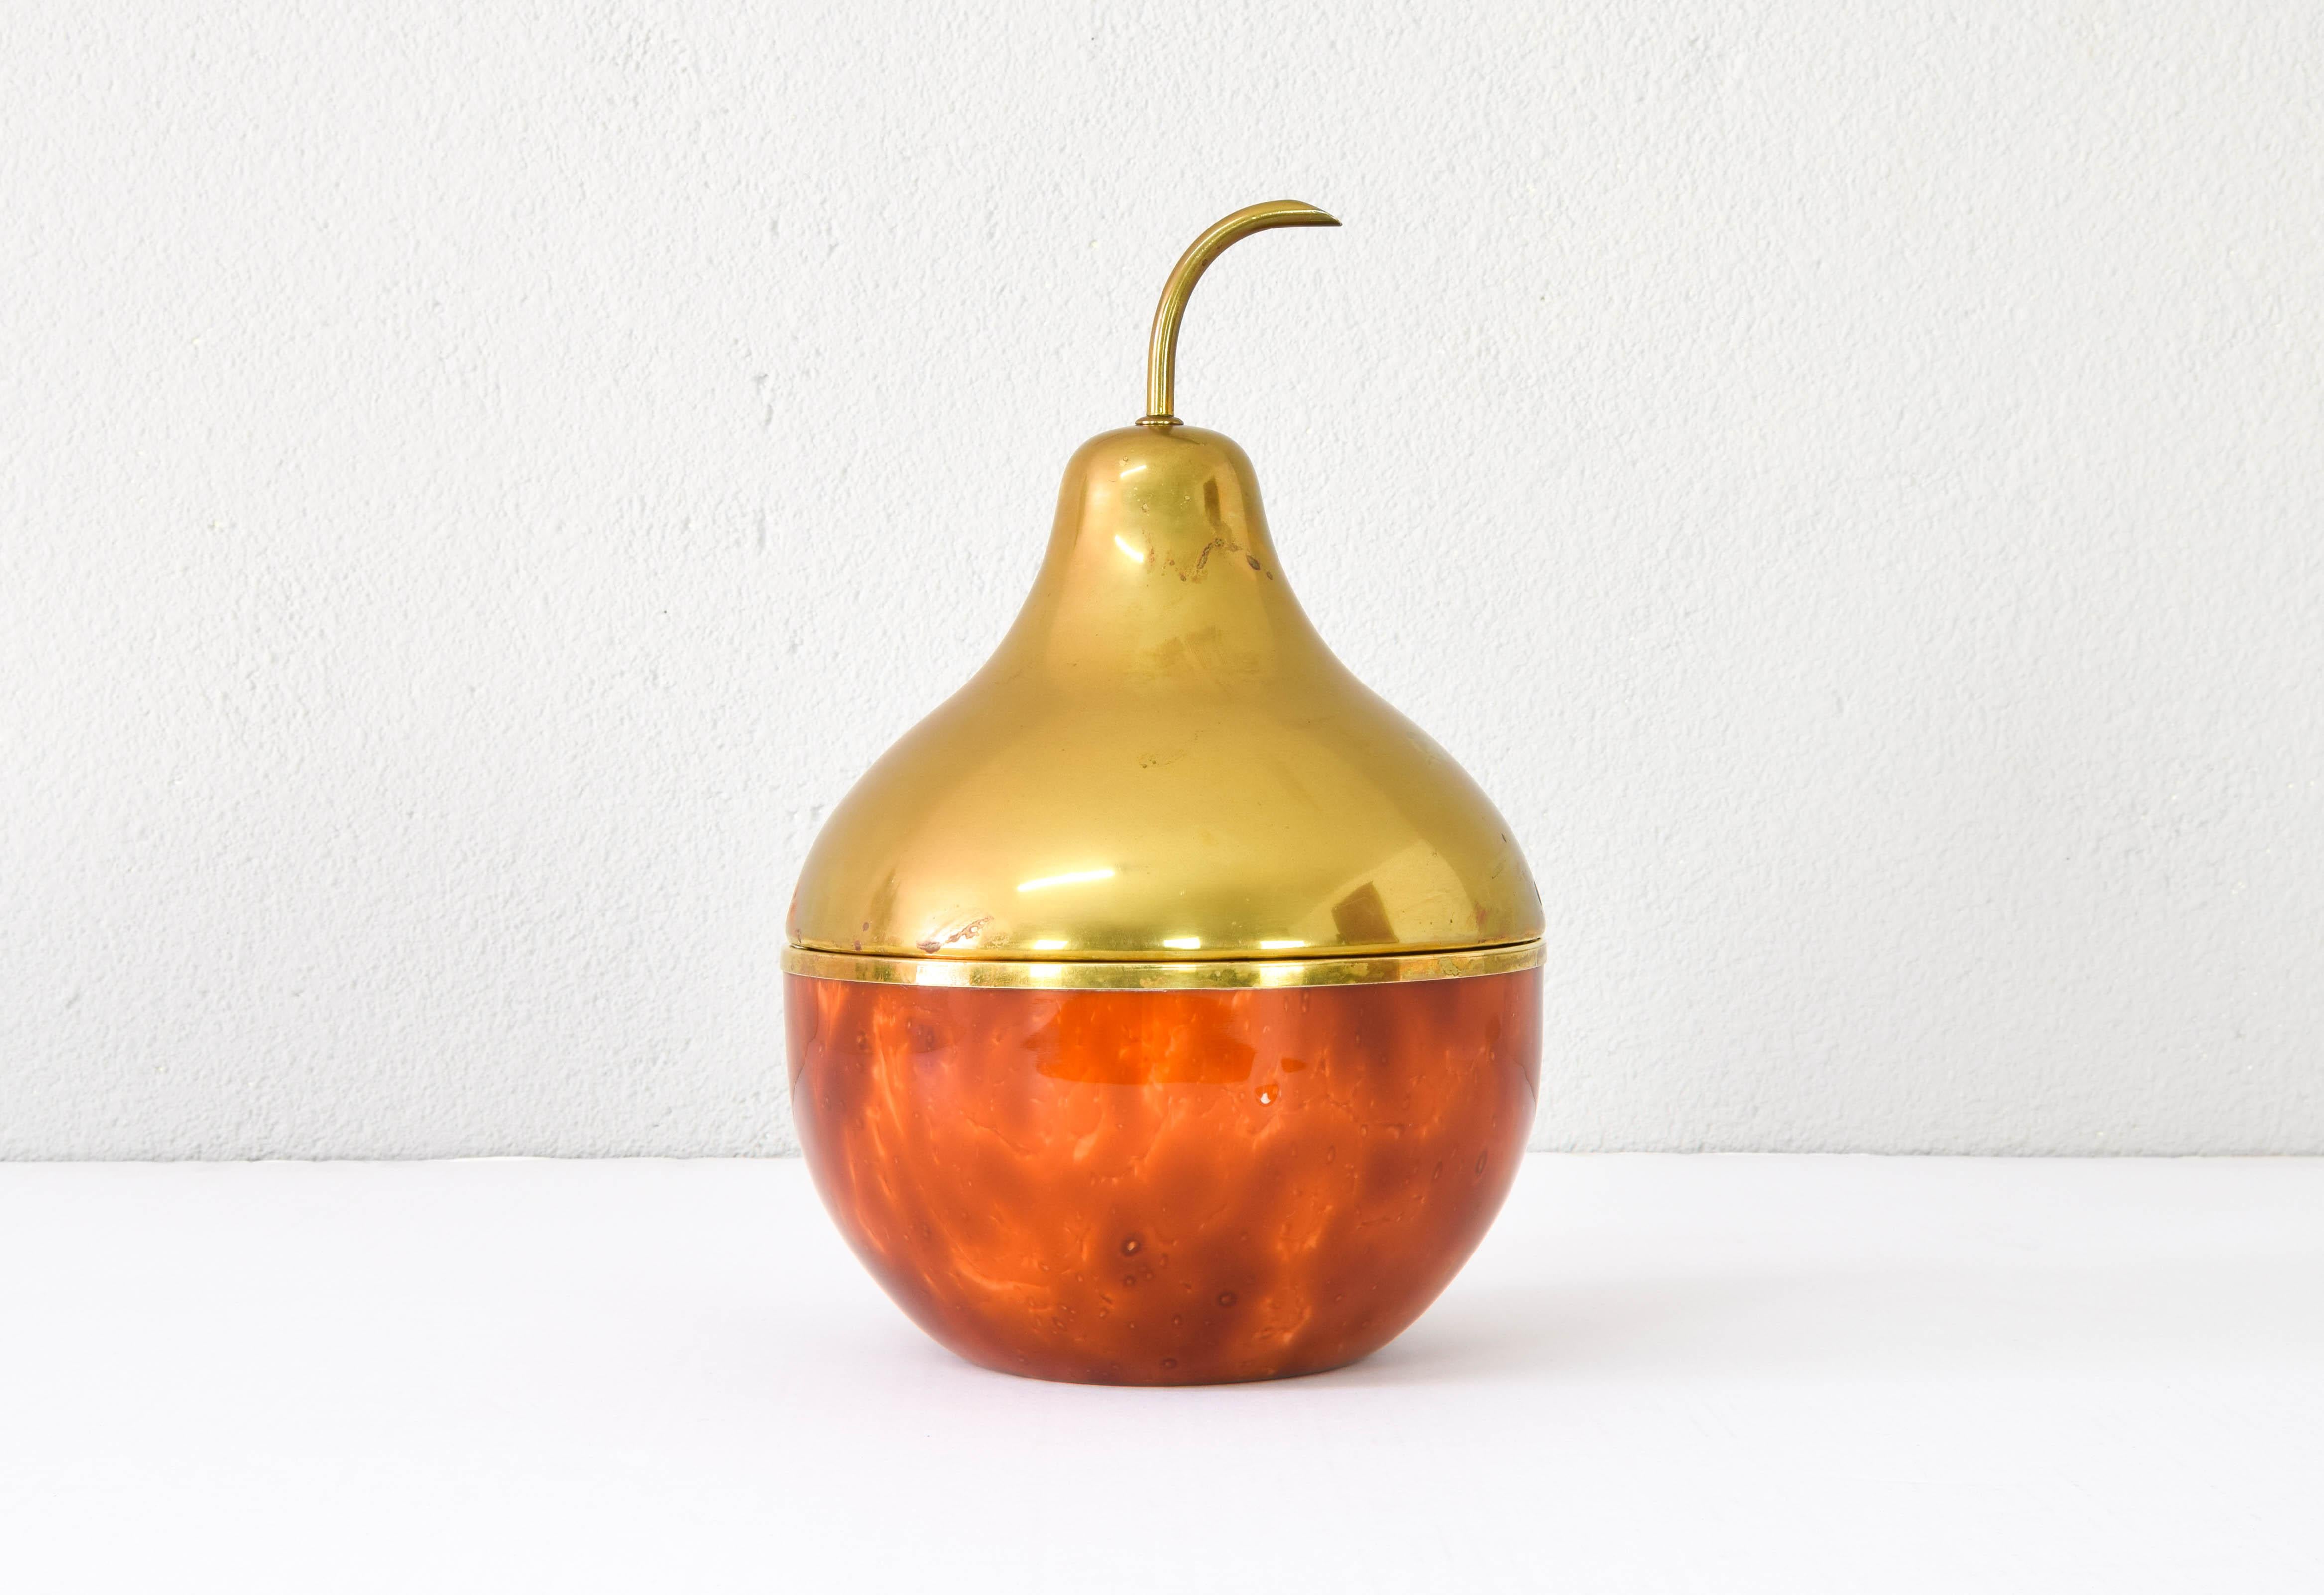 Tremendously attractive.
This oversized pear-shaped Italian ice bucket in the style of Mauro Manetti is a truly irresistible piece.
Its shape, its colors and its combination of materials make it a nice, elegant and daring design bet.

His body